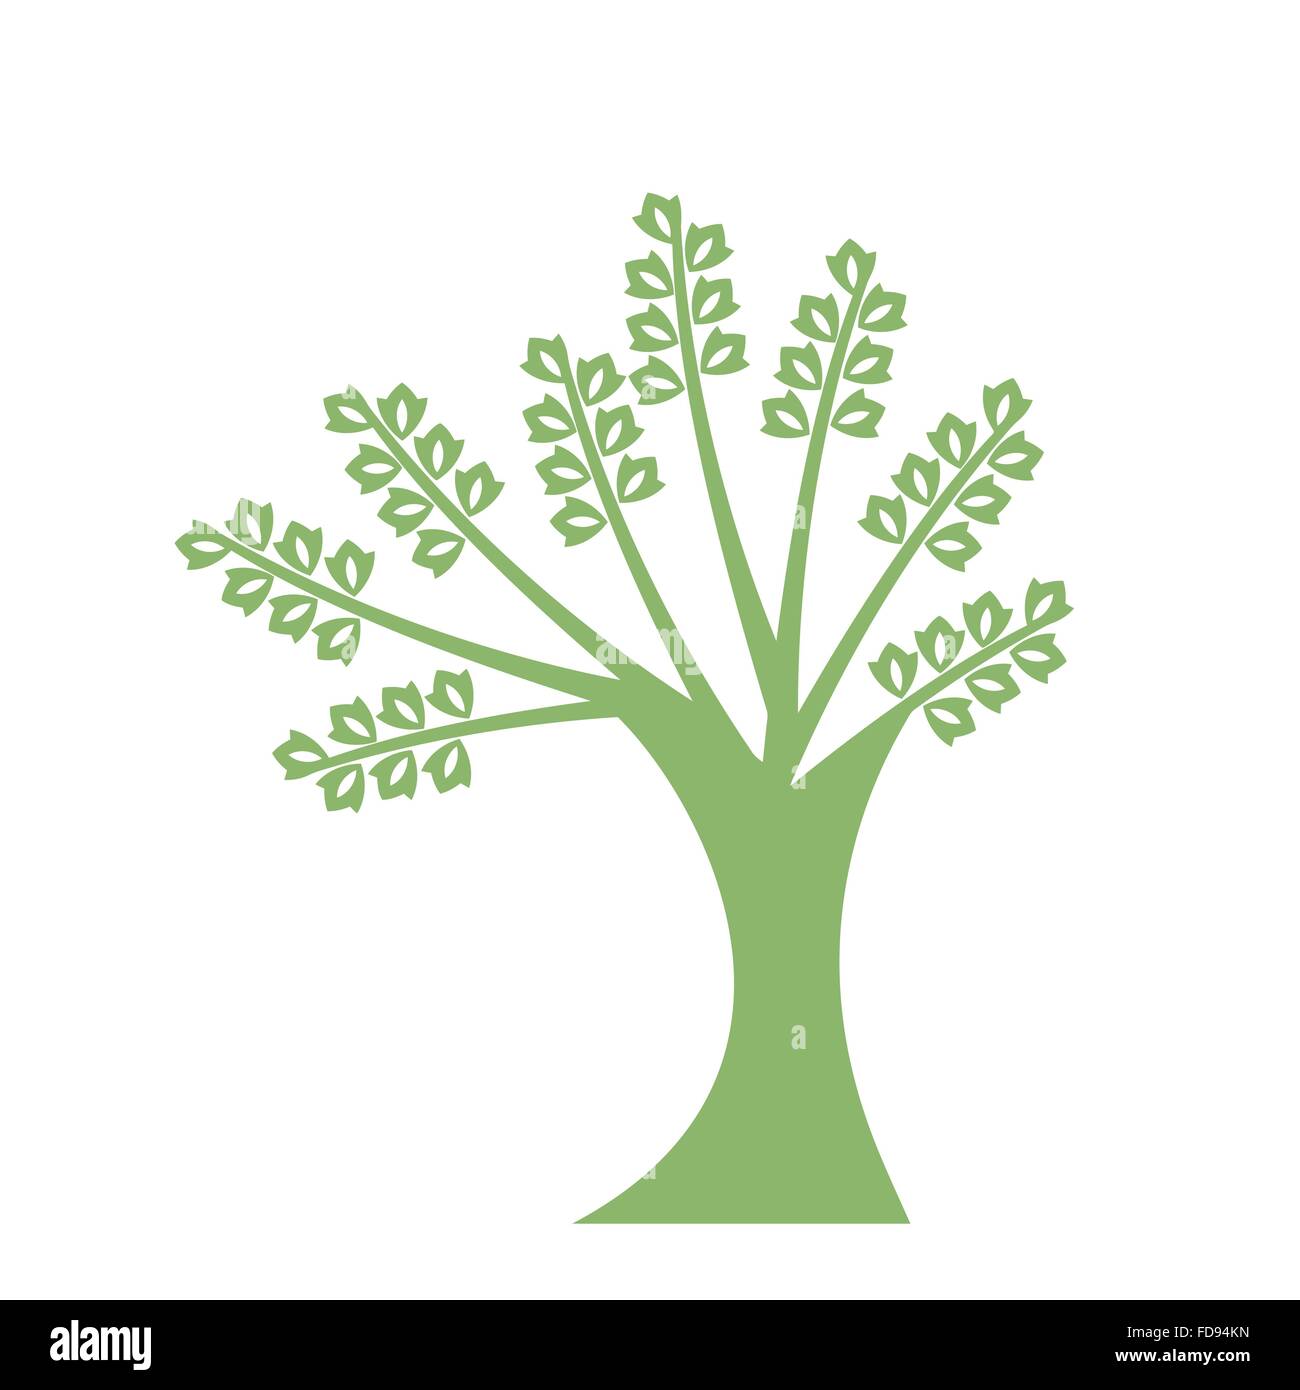 Art tree silhouette isolated Stock Vector